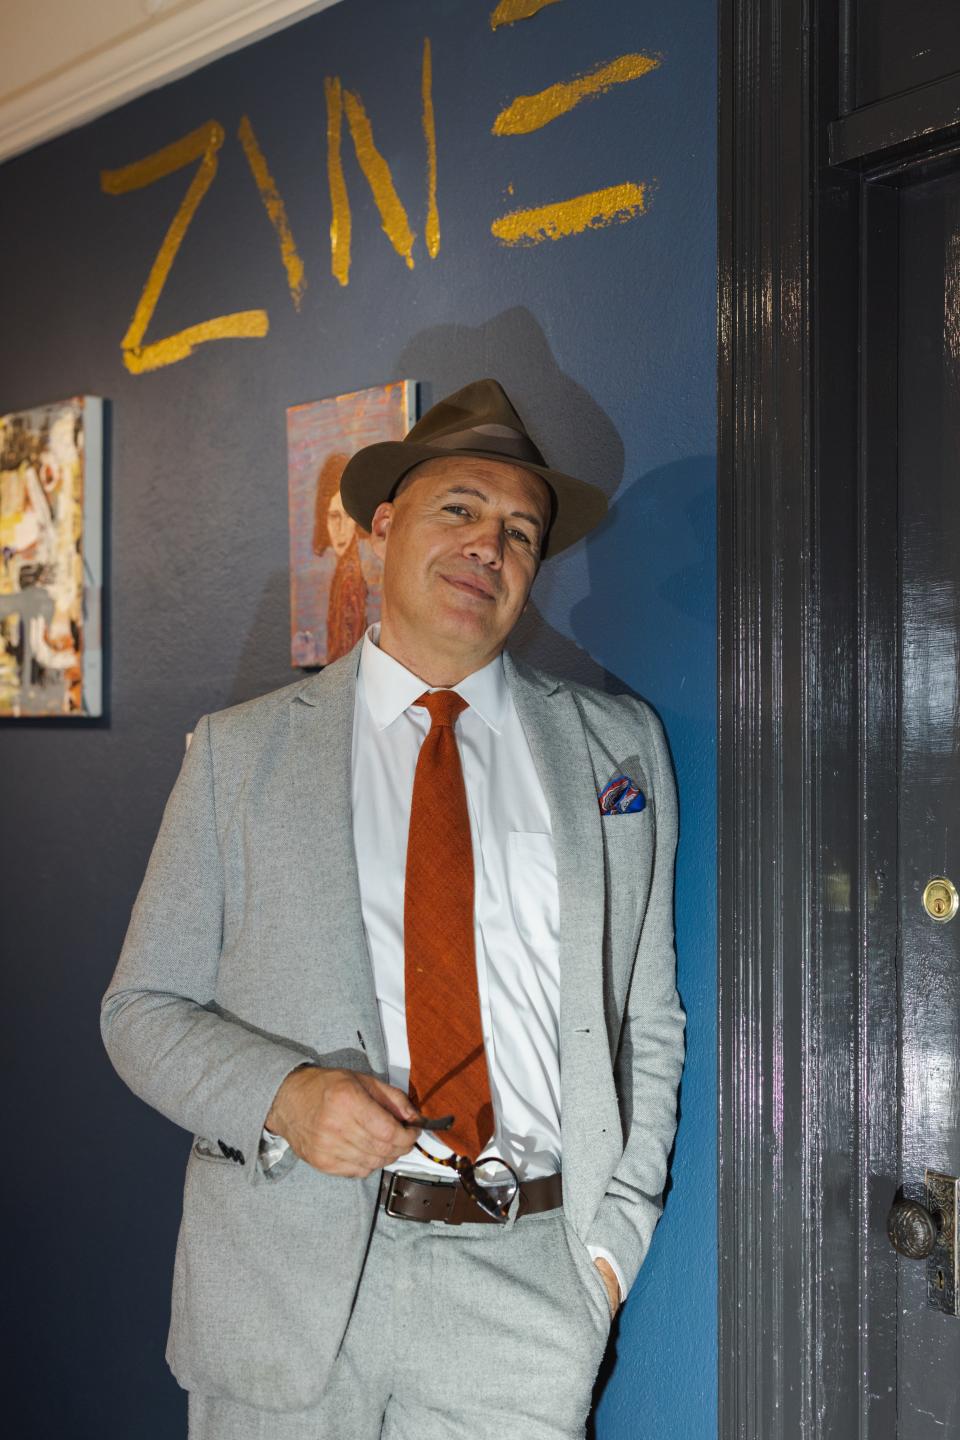 Billy Zane with his artwork at the Red Lion Inn.